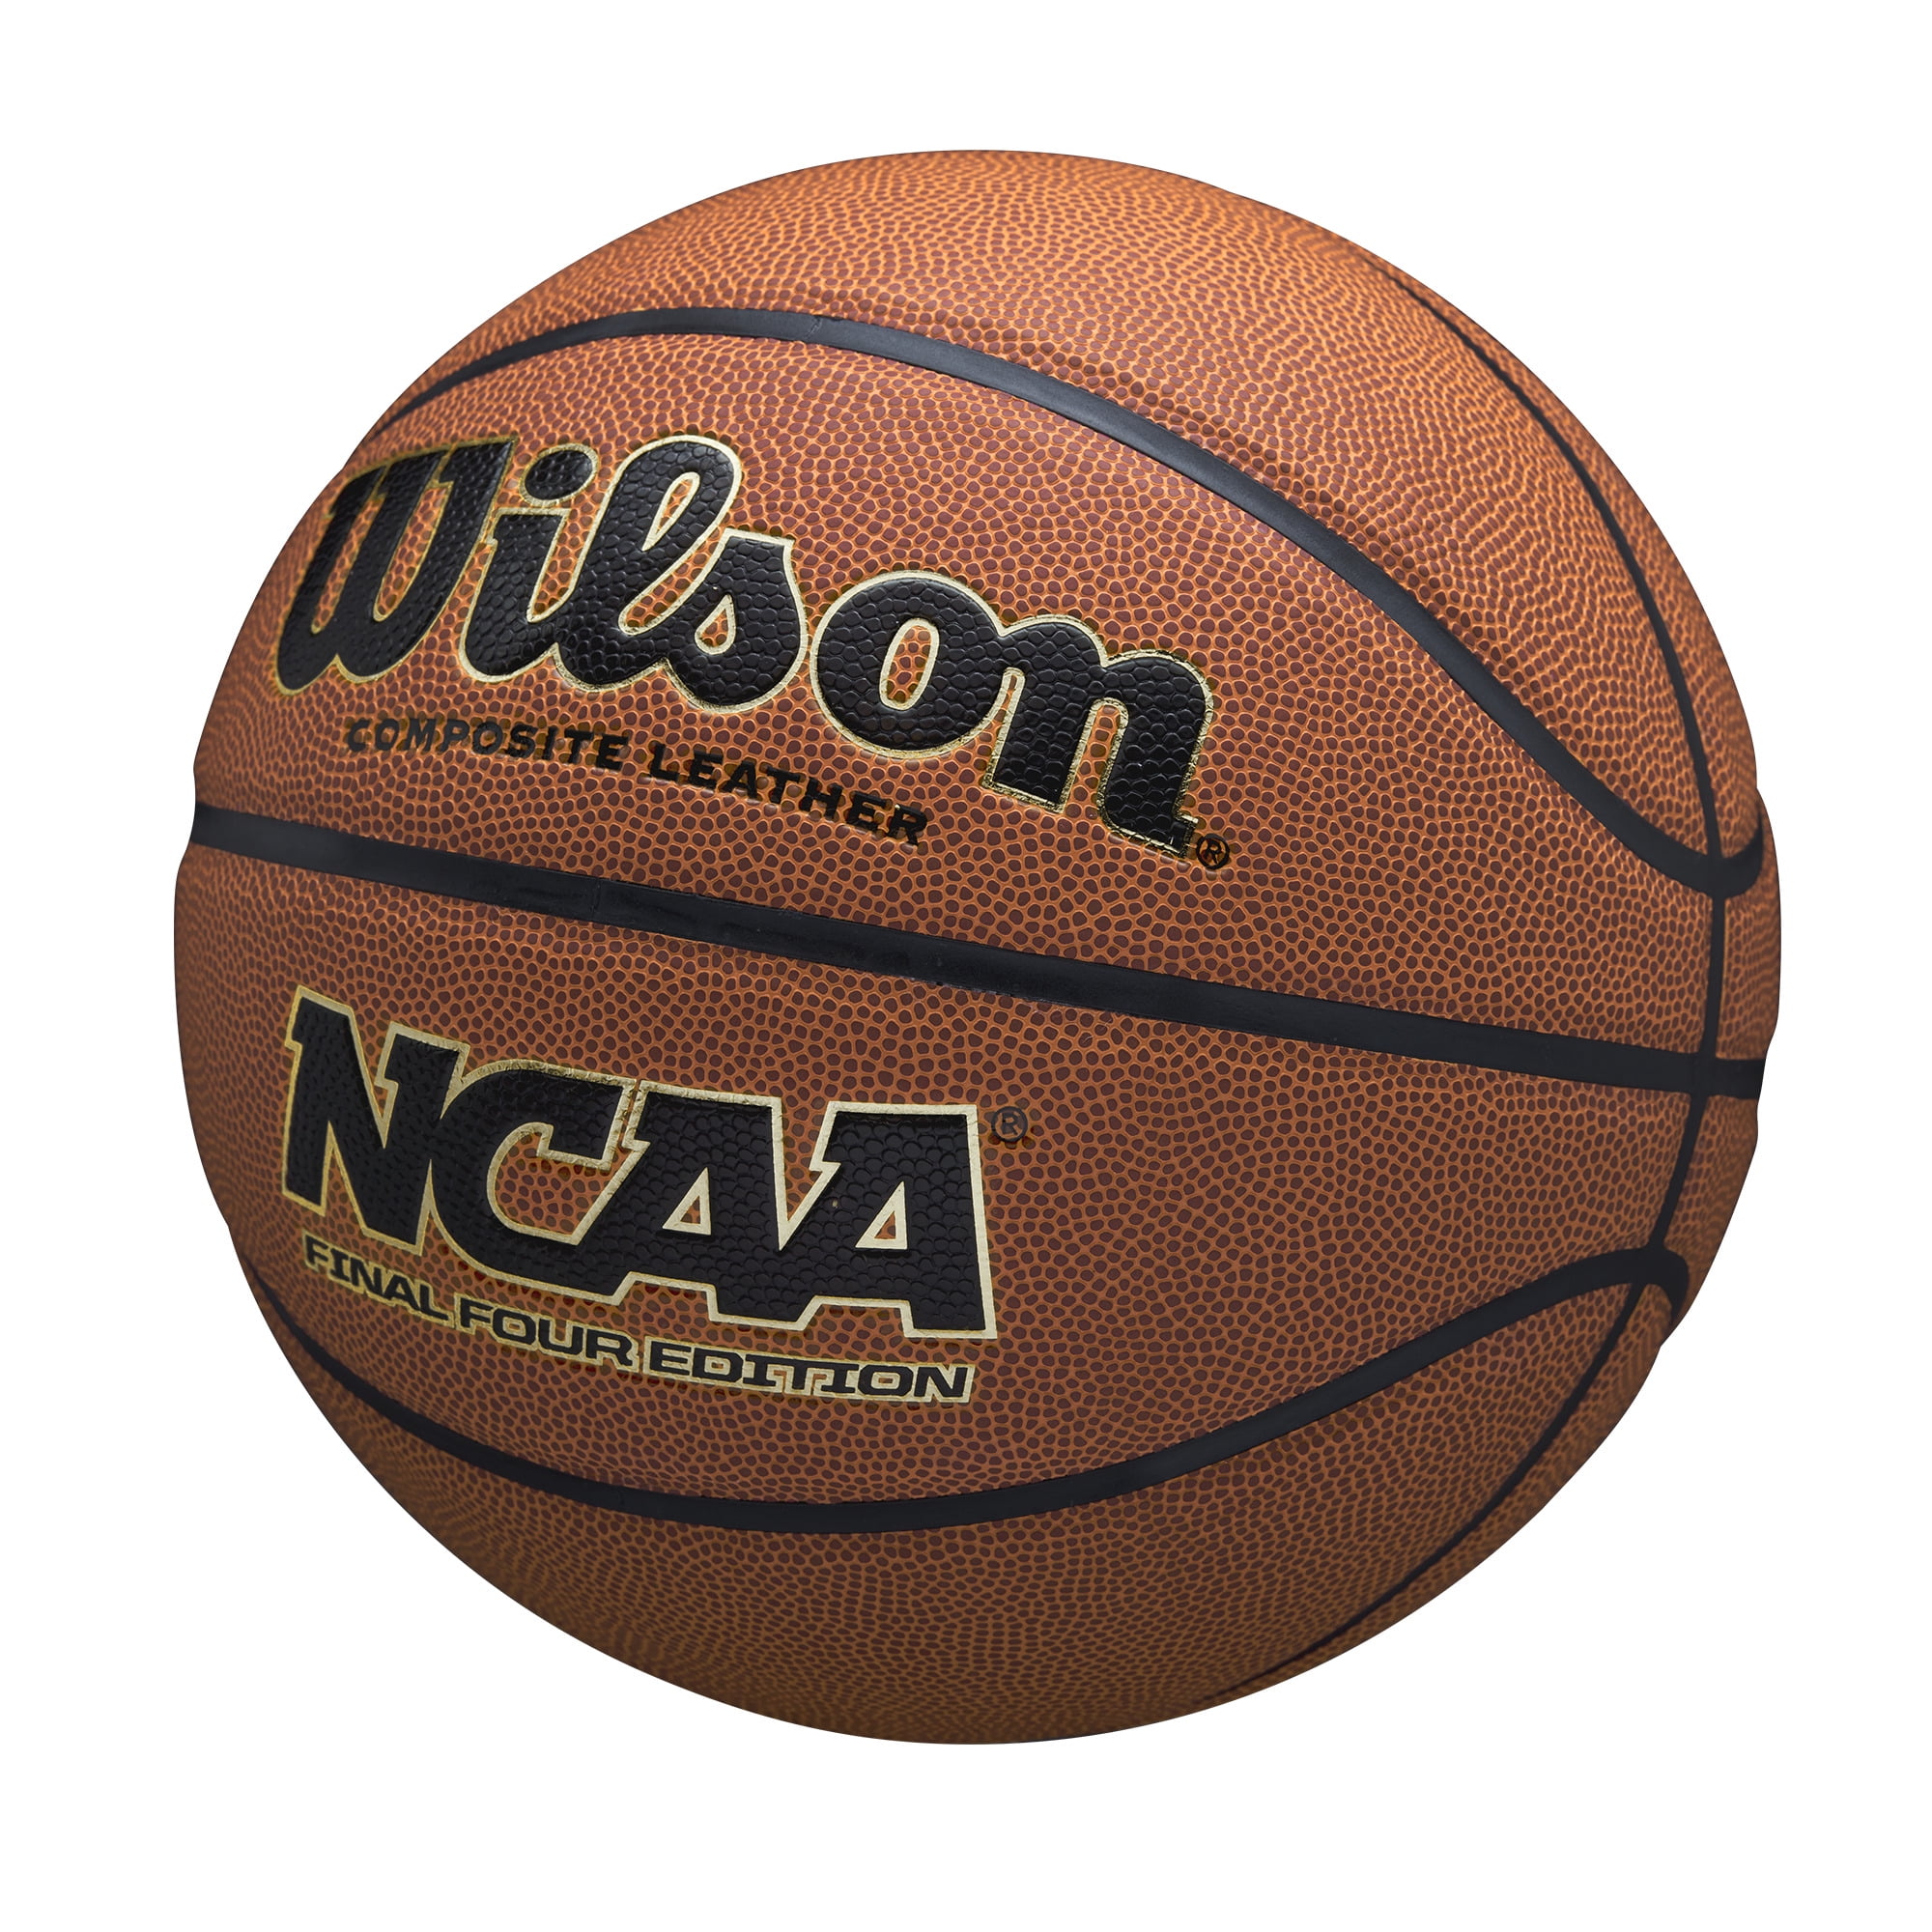 Wilson NCAA Composite Leather Basketball Intermediate 28.5 Inch for sale online 